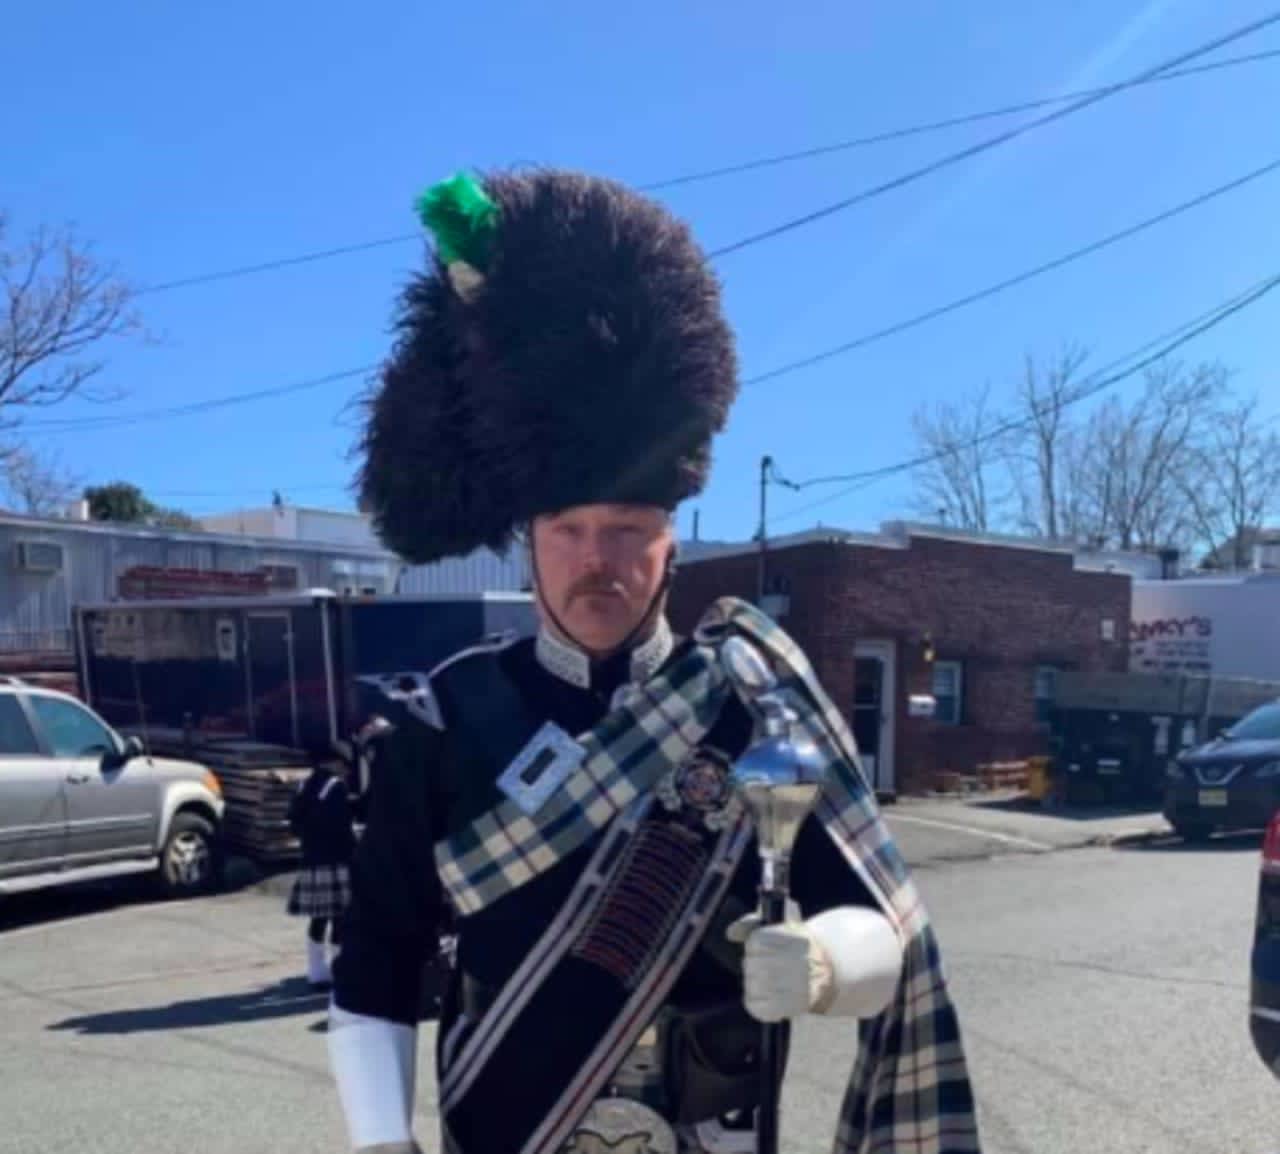 Shawn Kelly was a member of the Union County Police/Fire Pipes and Drums.